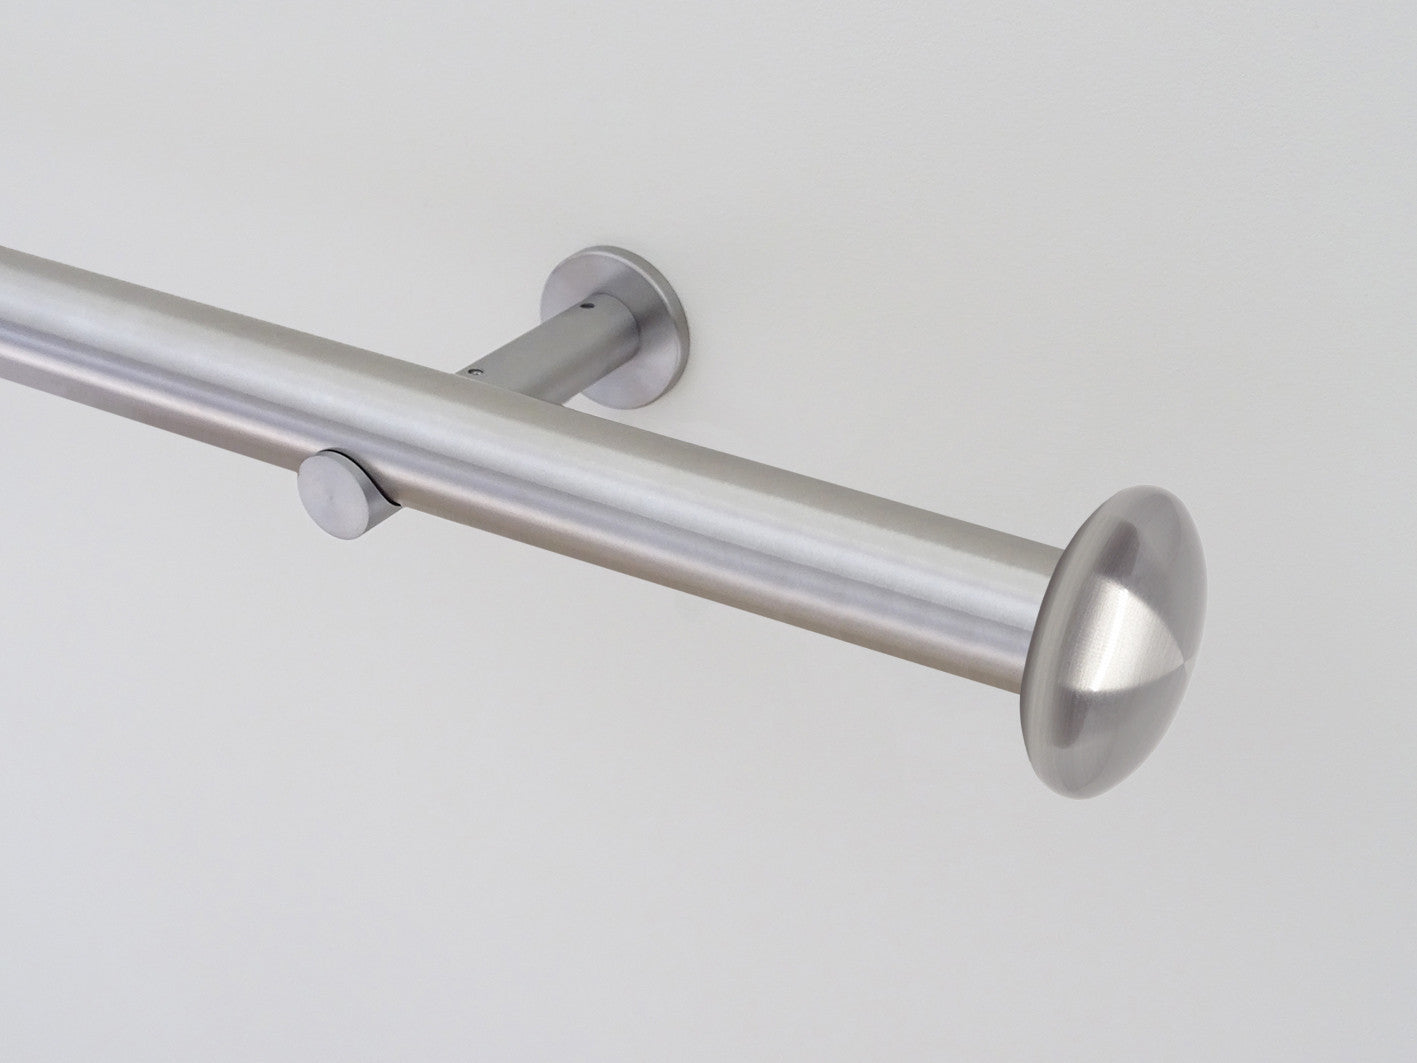 30mm diameter stainless steel curtain pole collection with elliptical finials